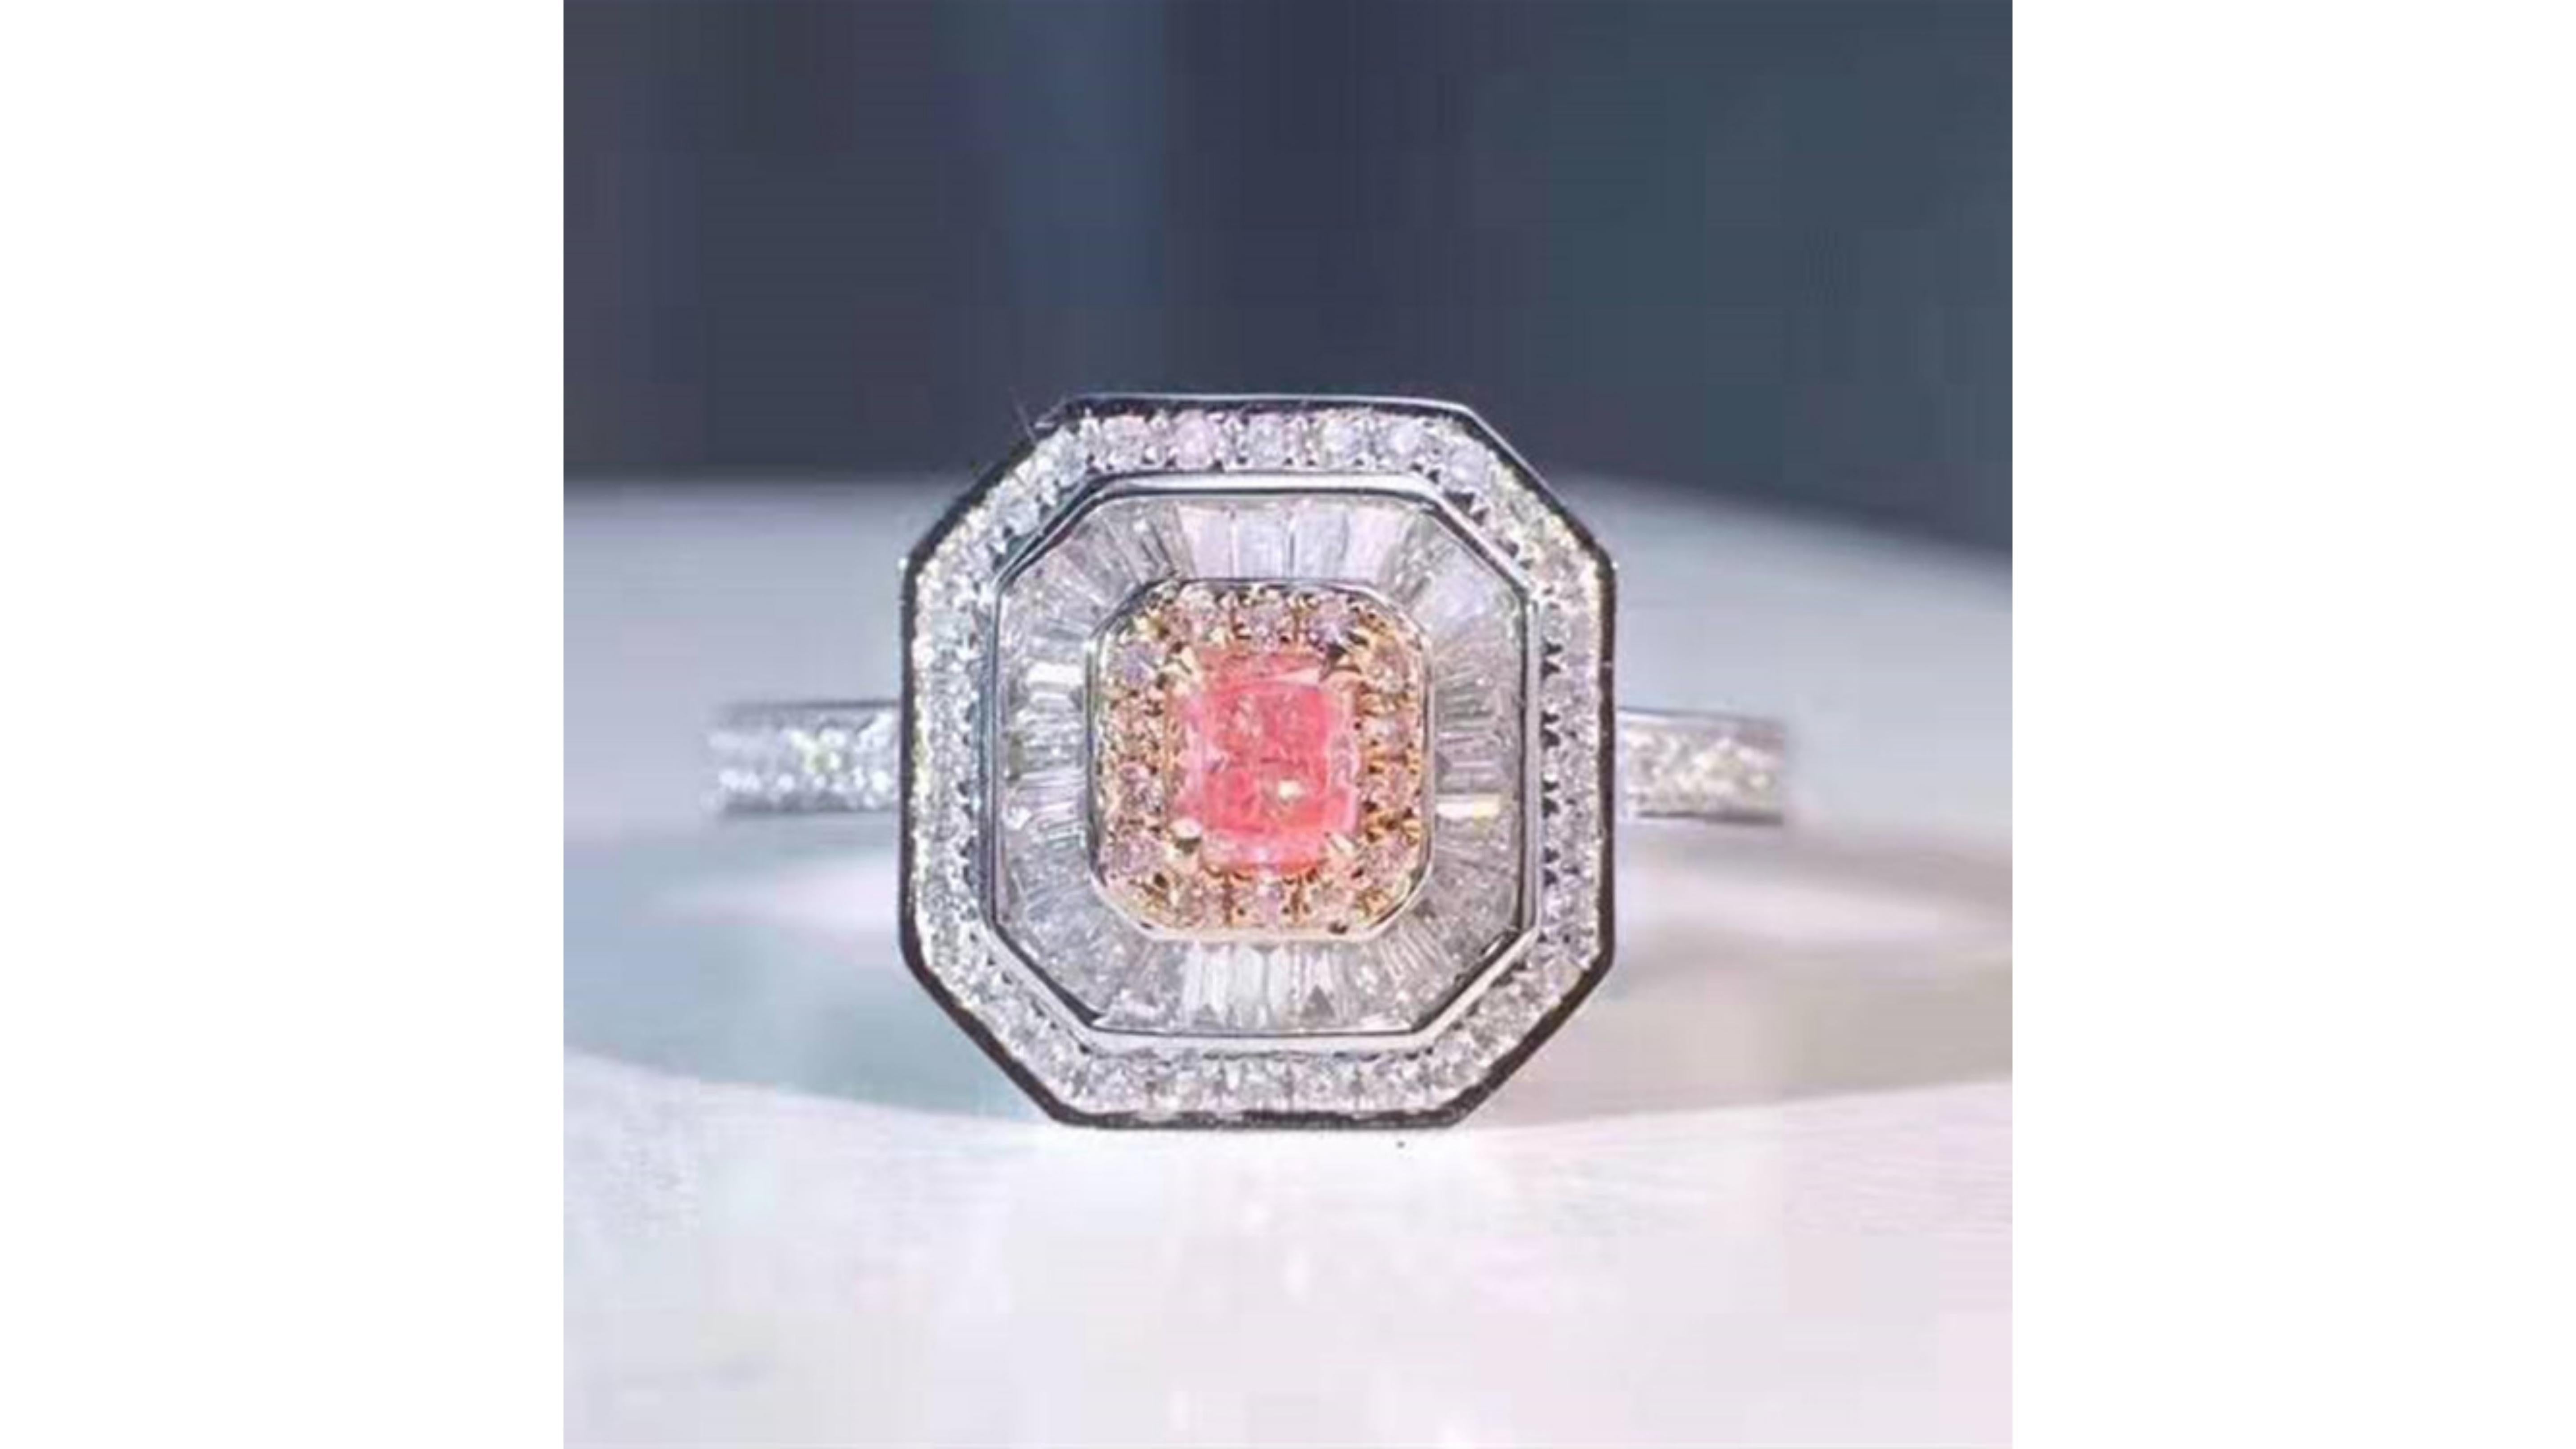 Fancy Pink Diamond Ring 18 Karat White Gold.    With 117 Diamonds this really does stand out and it has baguette diamonds around the light pink ones too.  Their scarcity and stunning beauty make natural pink diamonds incredibly intriguing. Highly